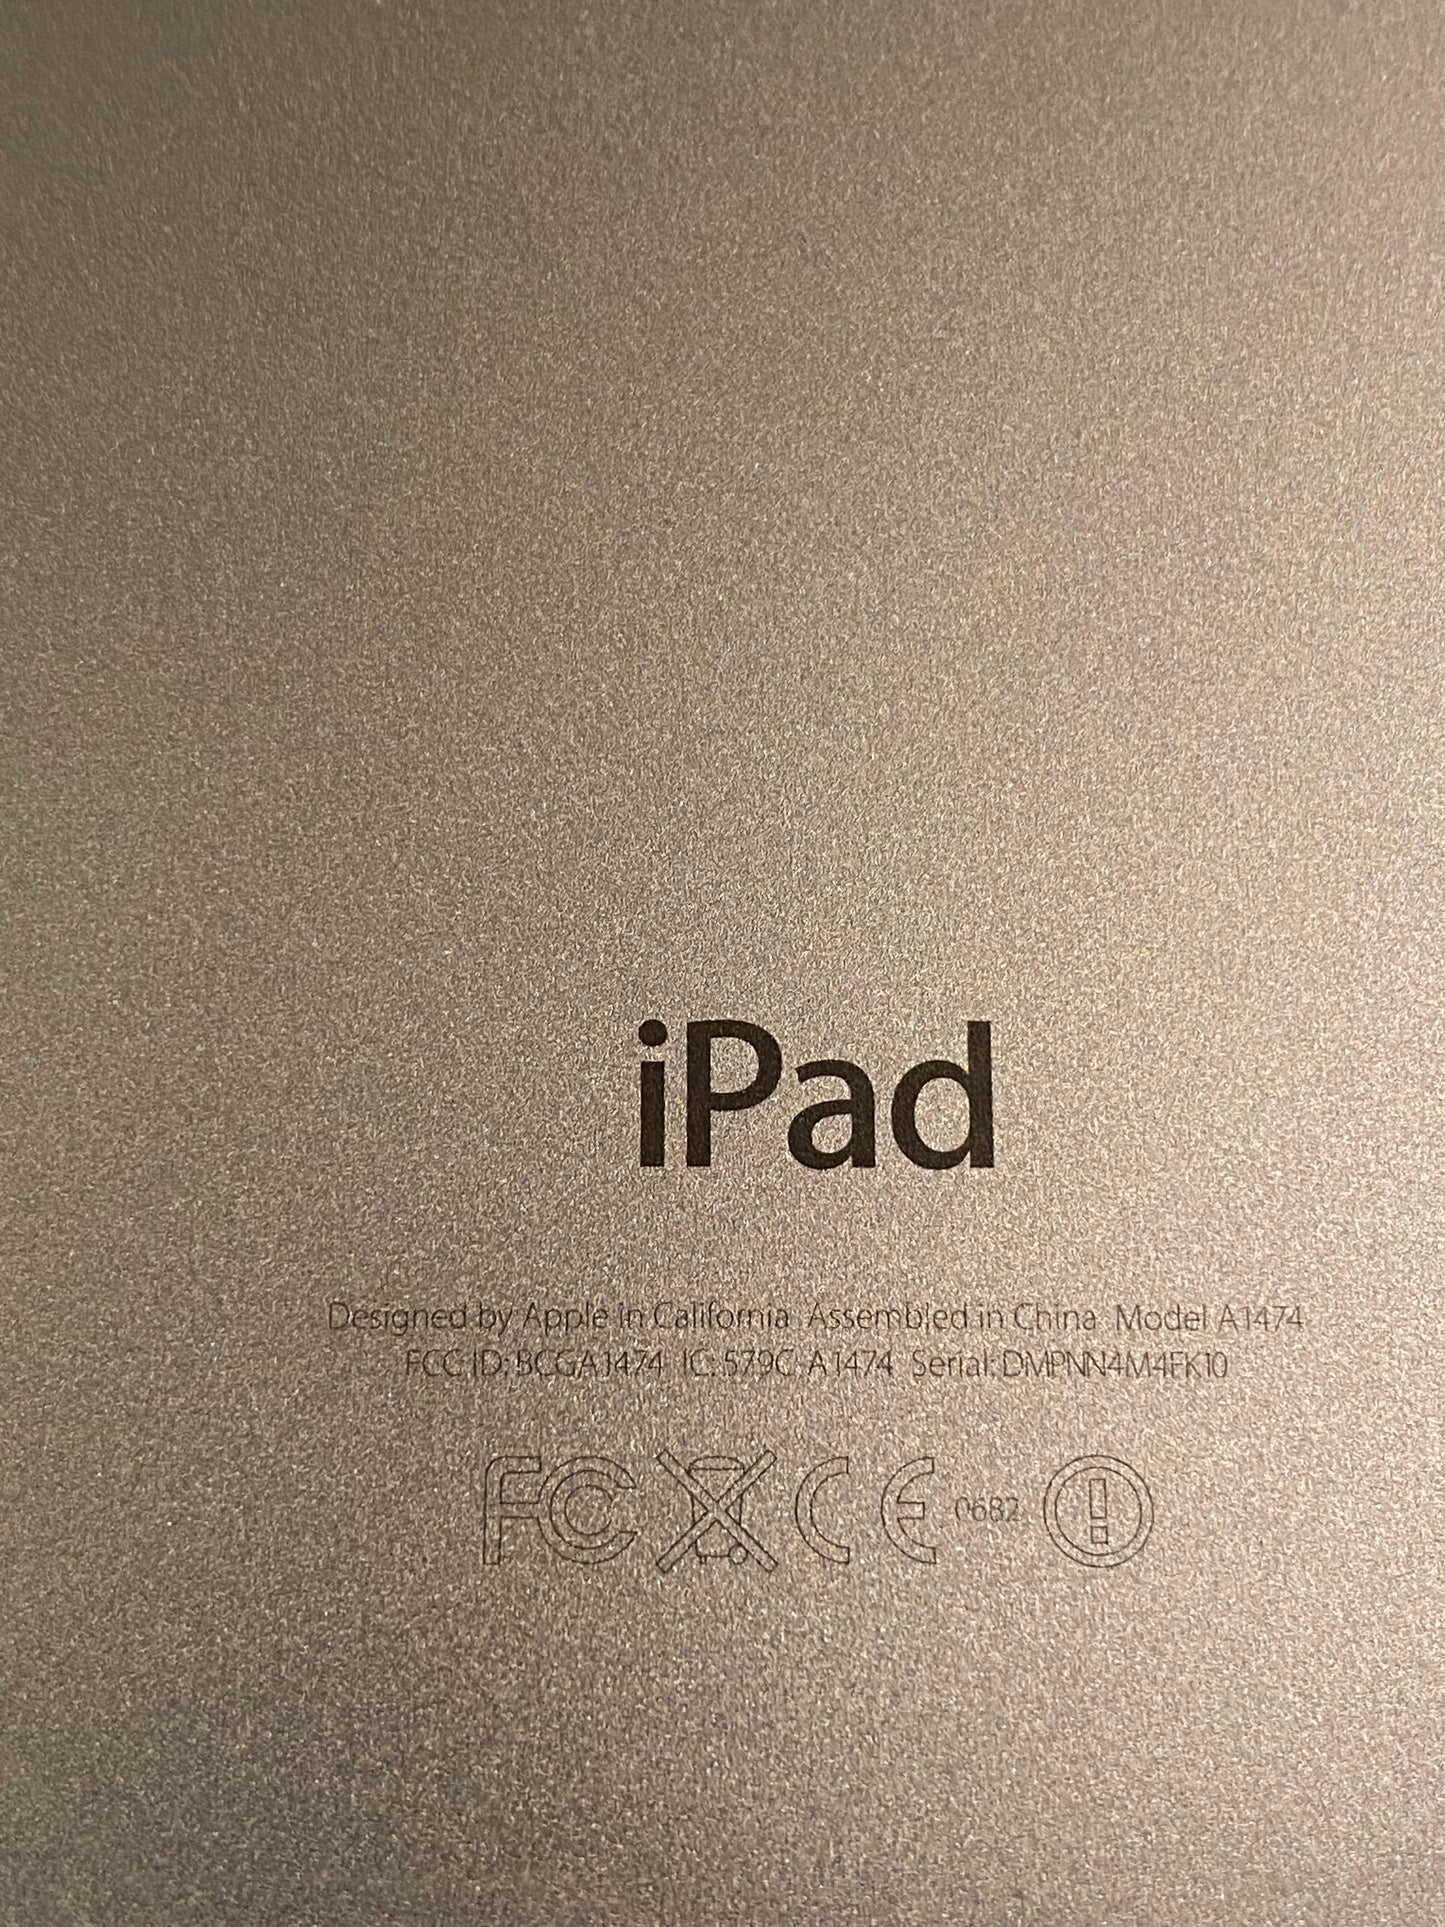 Pre-Owned IPad Air Wi-Fi 16GB Space Gray A1474 - Grade A CEI Certified